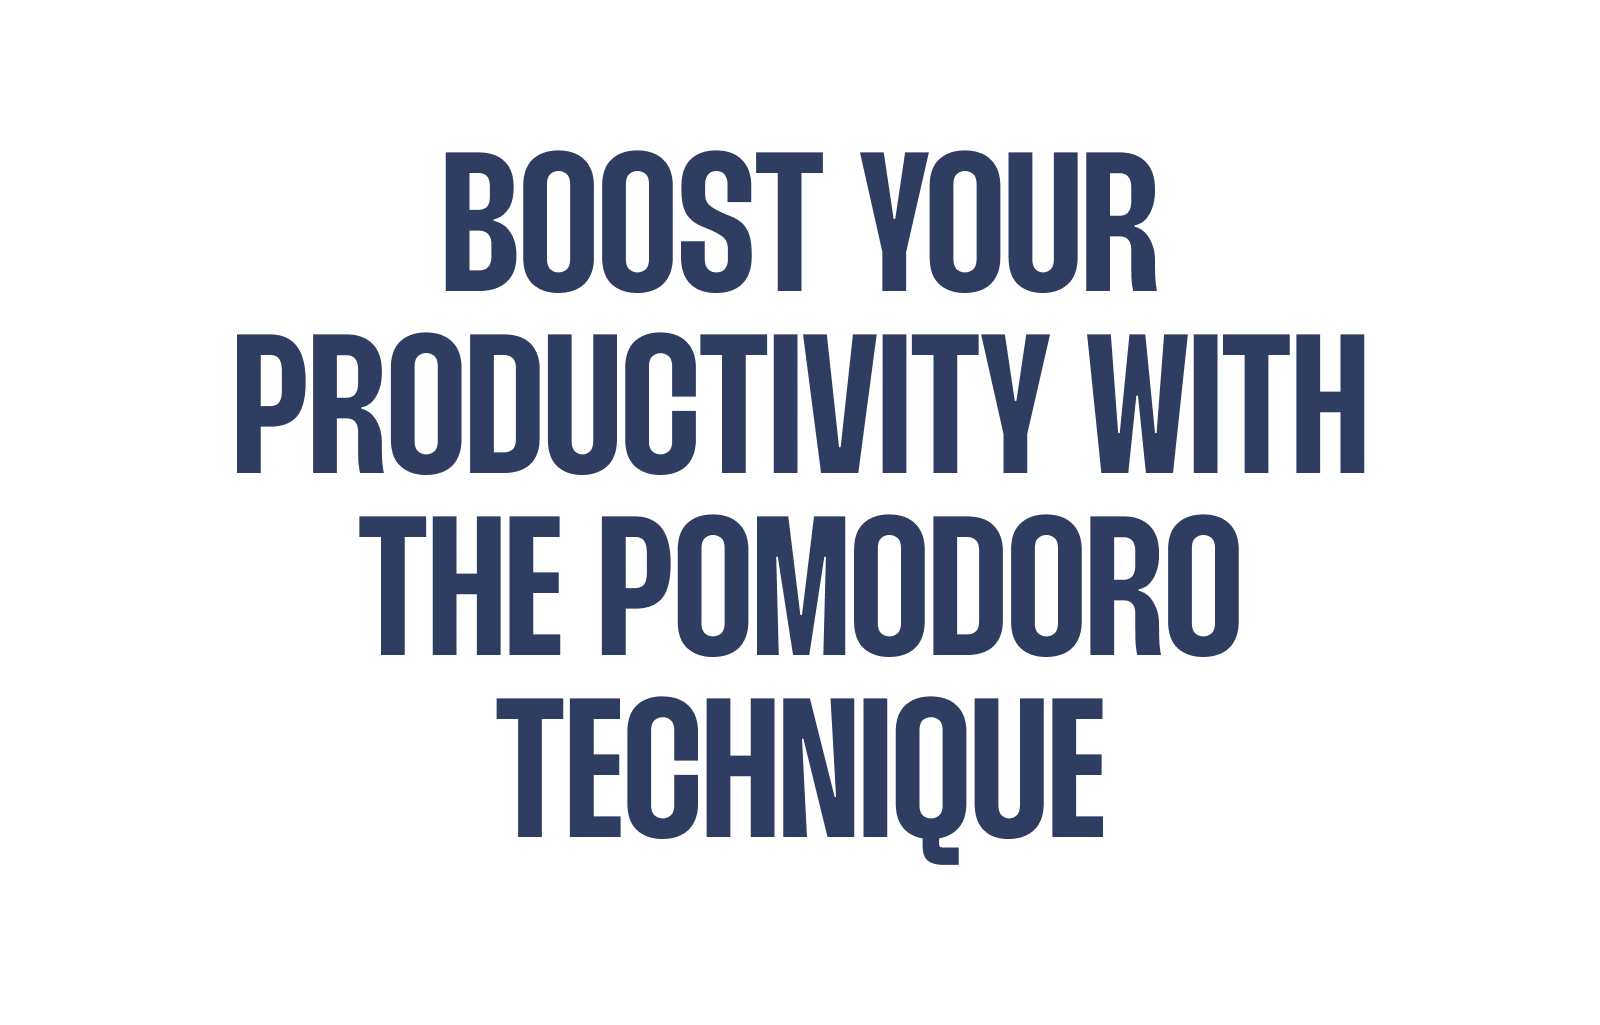 Boost Your Productivity with the Pomodoro Technique: A Guide for Effective Time Management